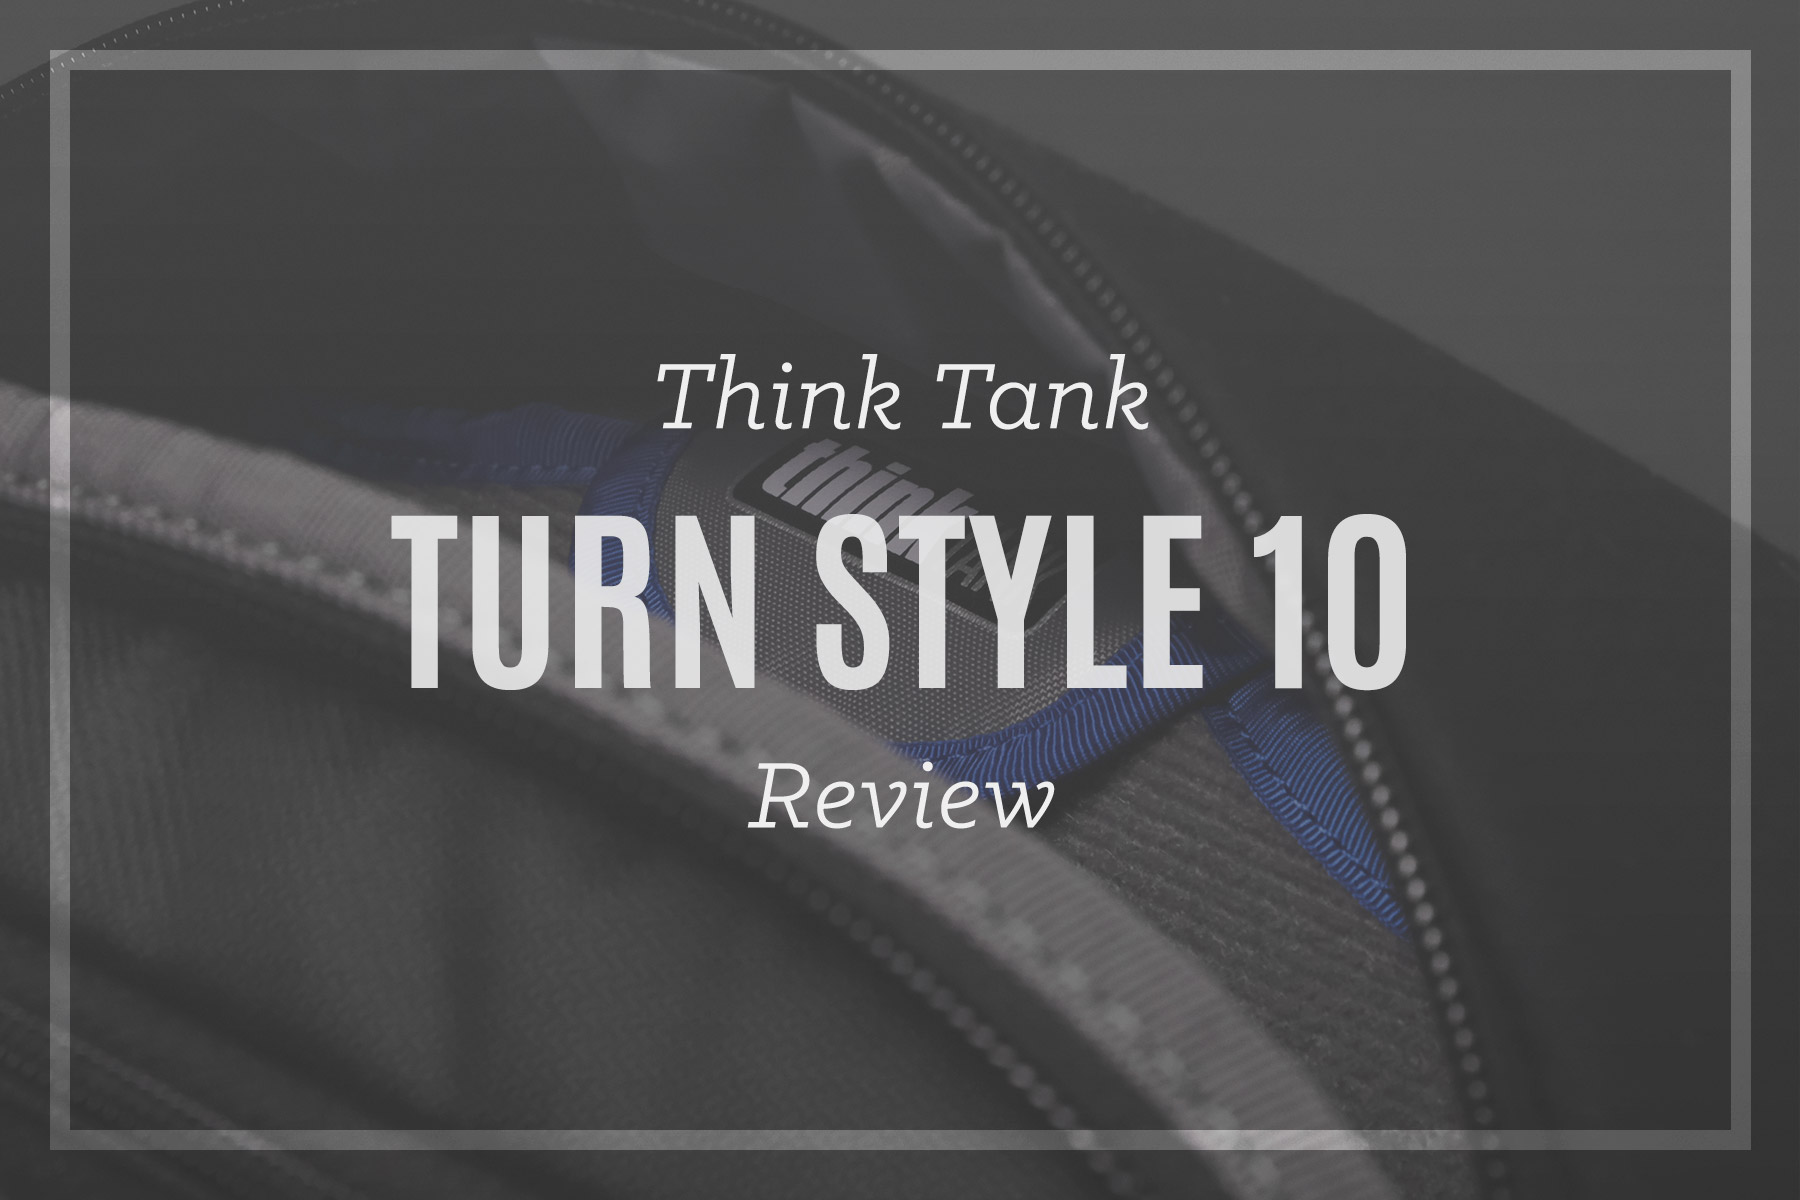 Think Tank Turnstyle 10 Review